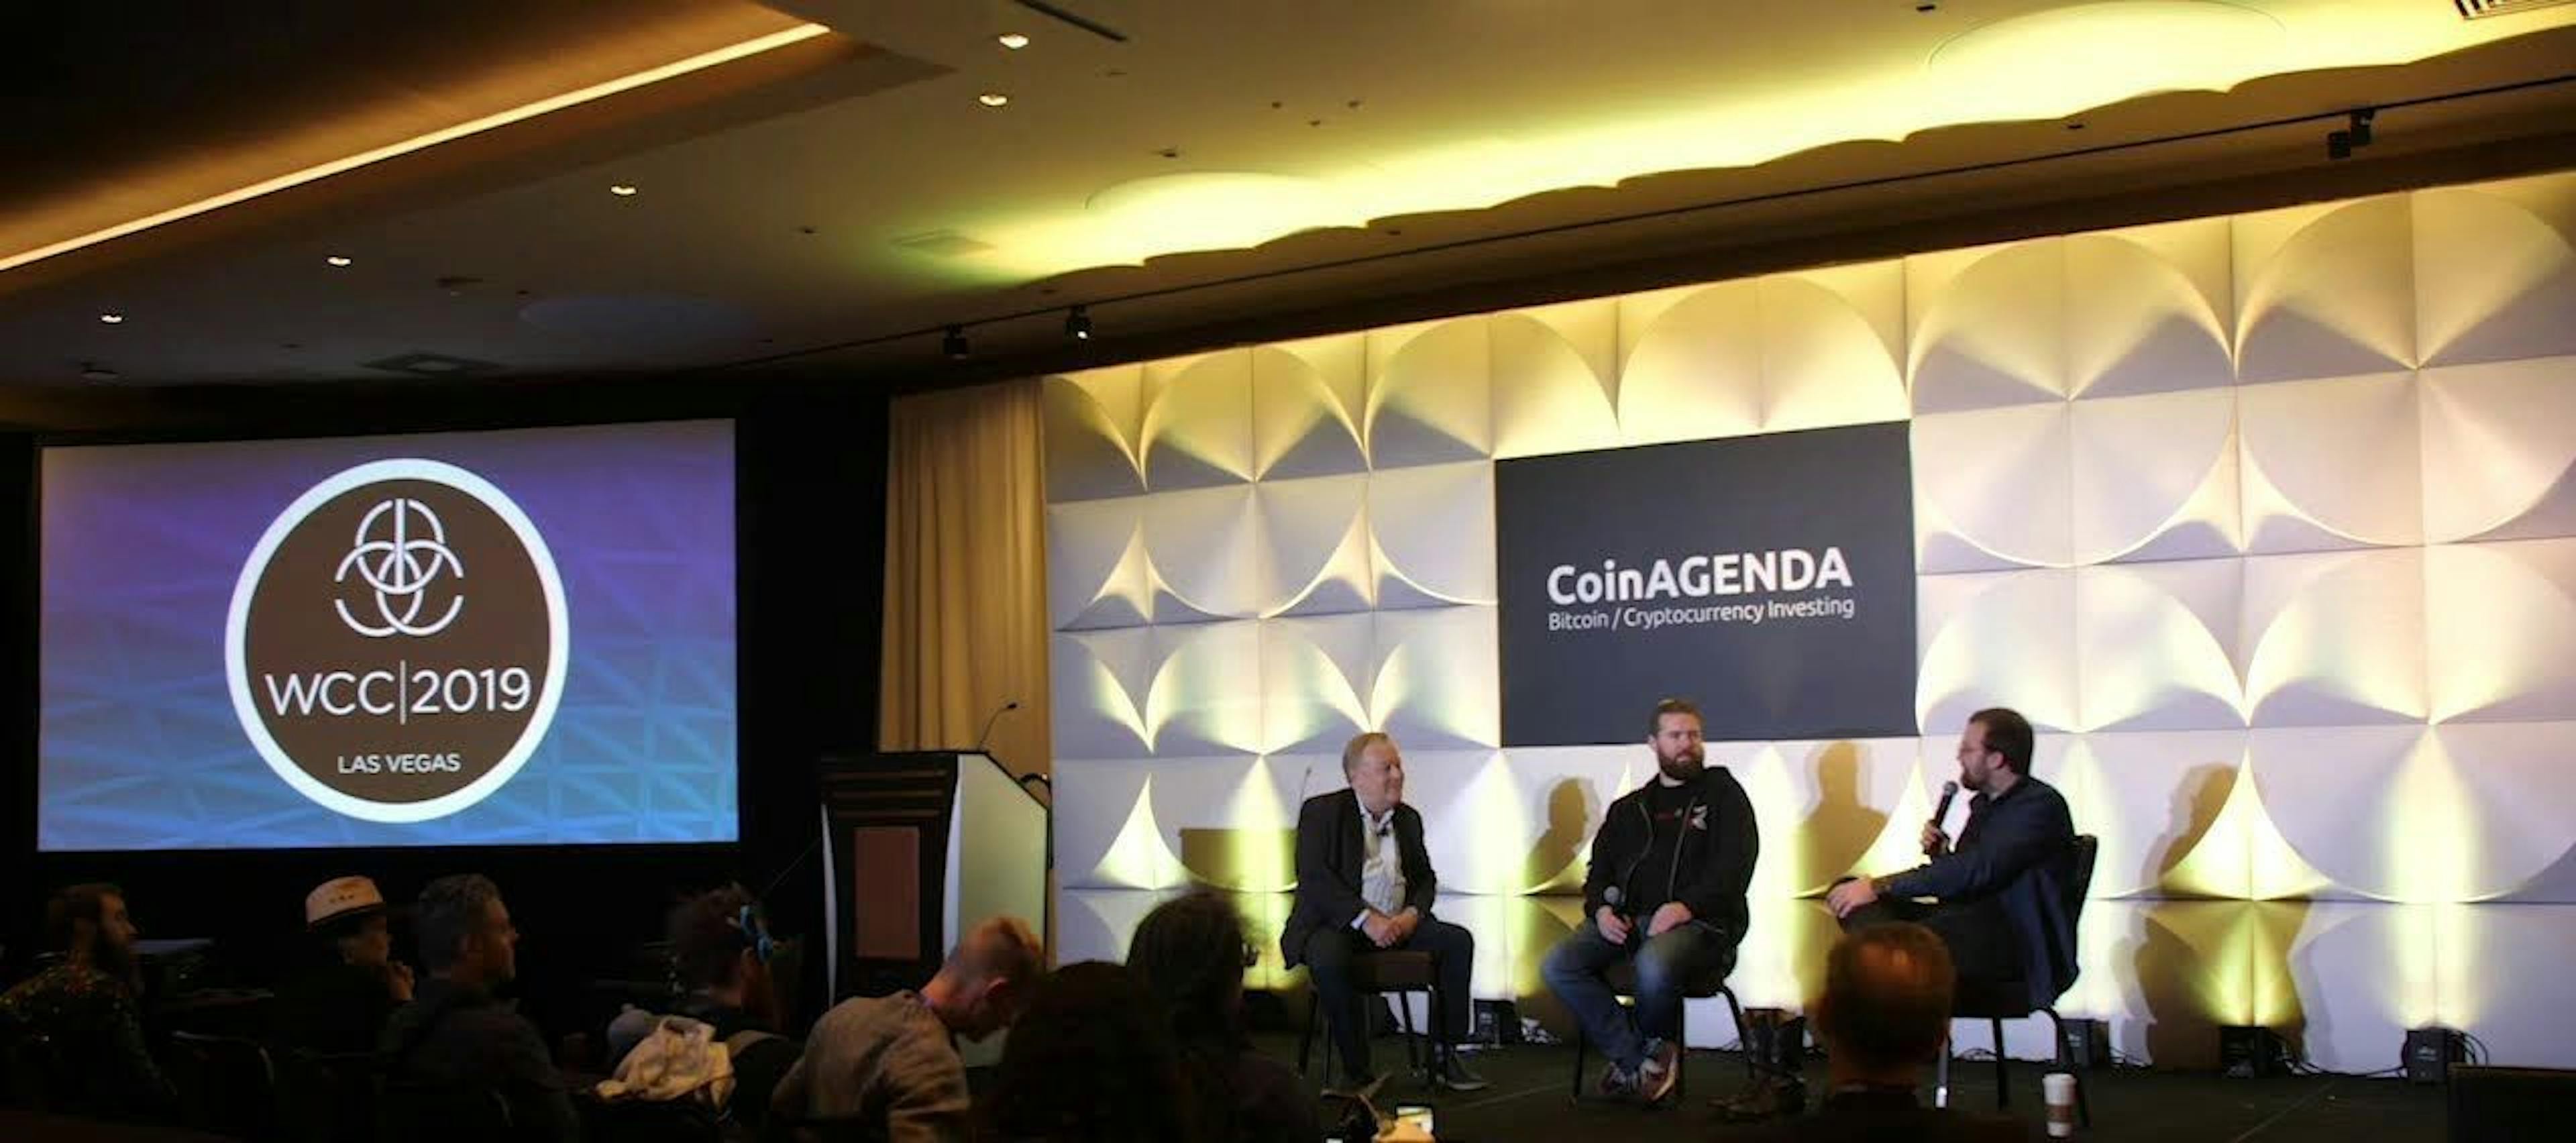 featured image - Happy 10th B-day, CoinAgenda!
Where FinTech Leaders Converge for Inspiration, Funding & Networking